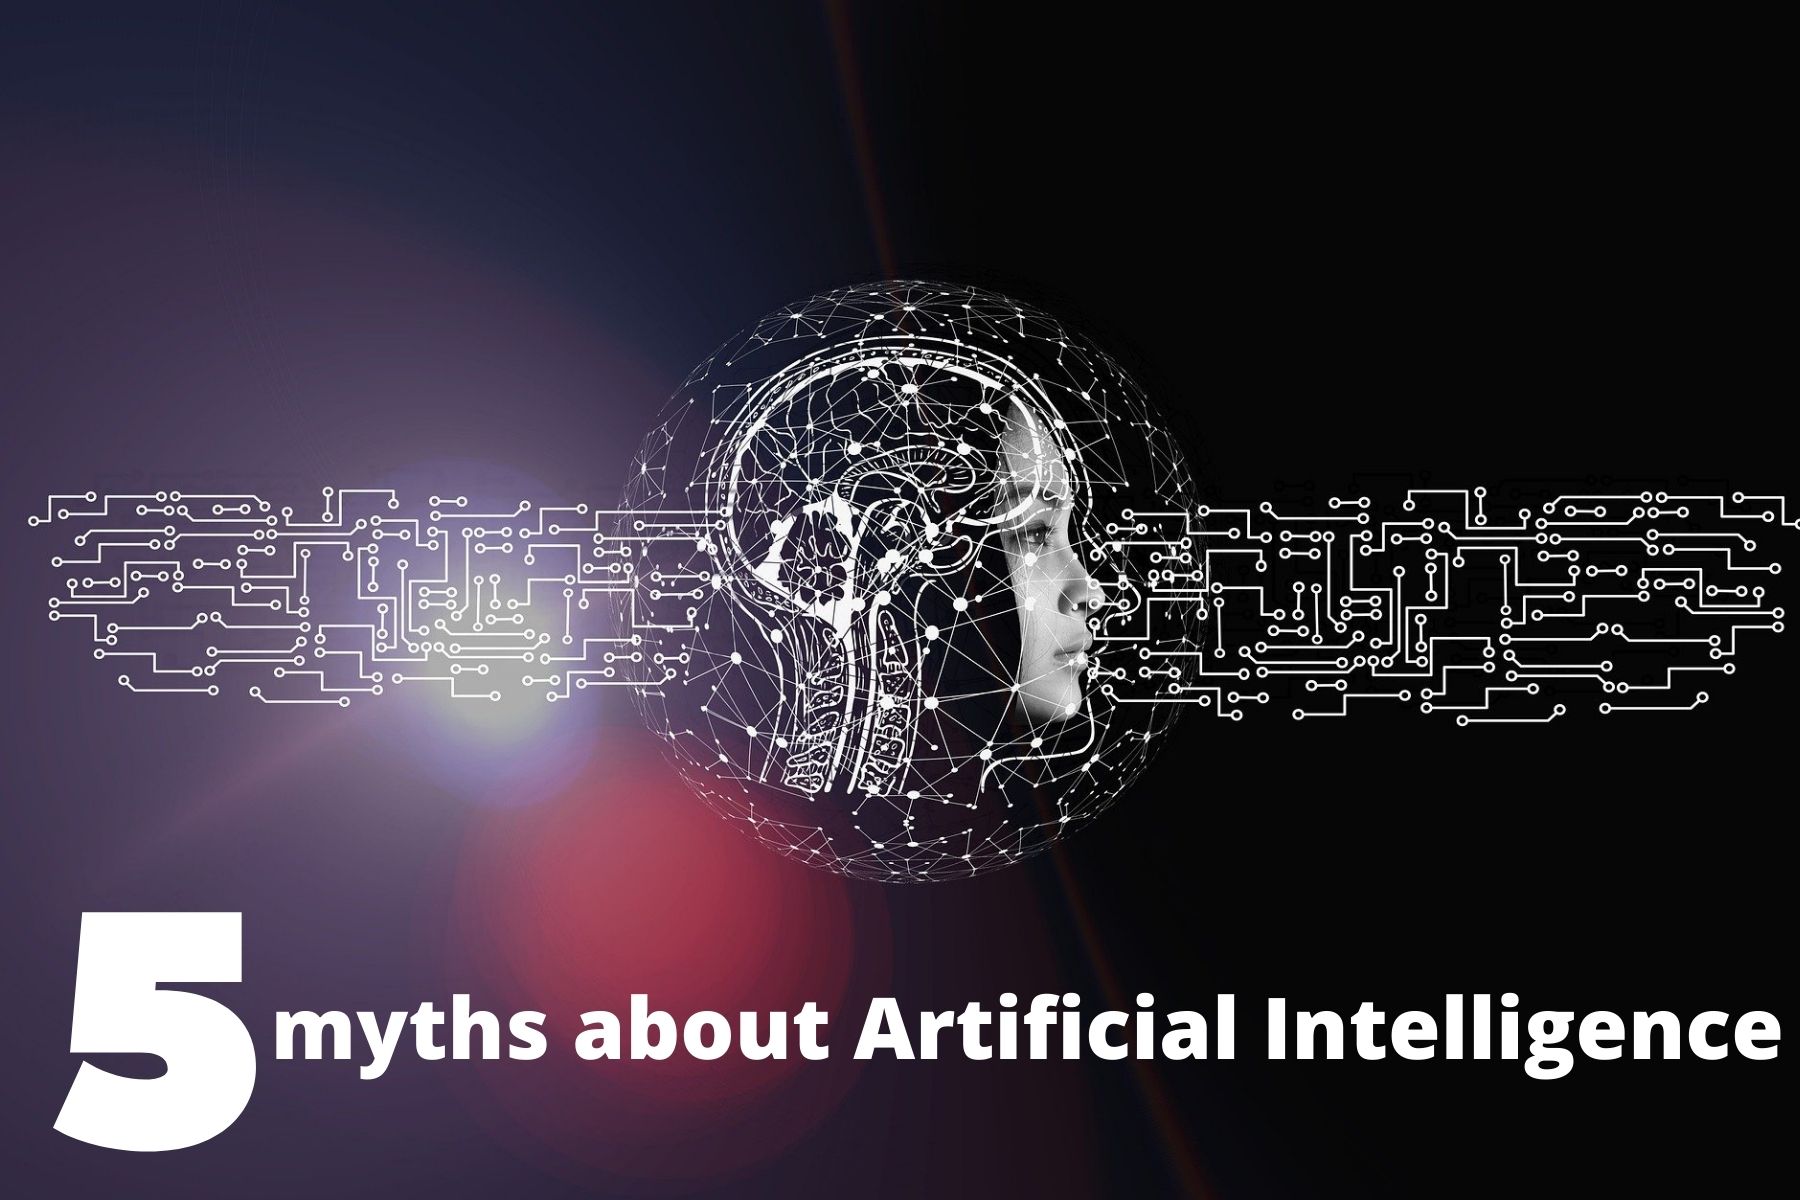 5myths about Artificial Intelligence